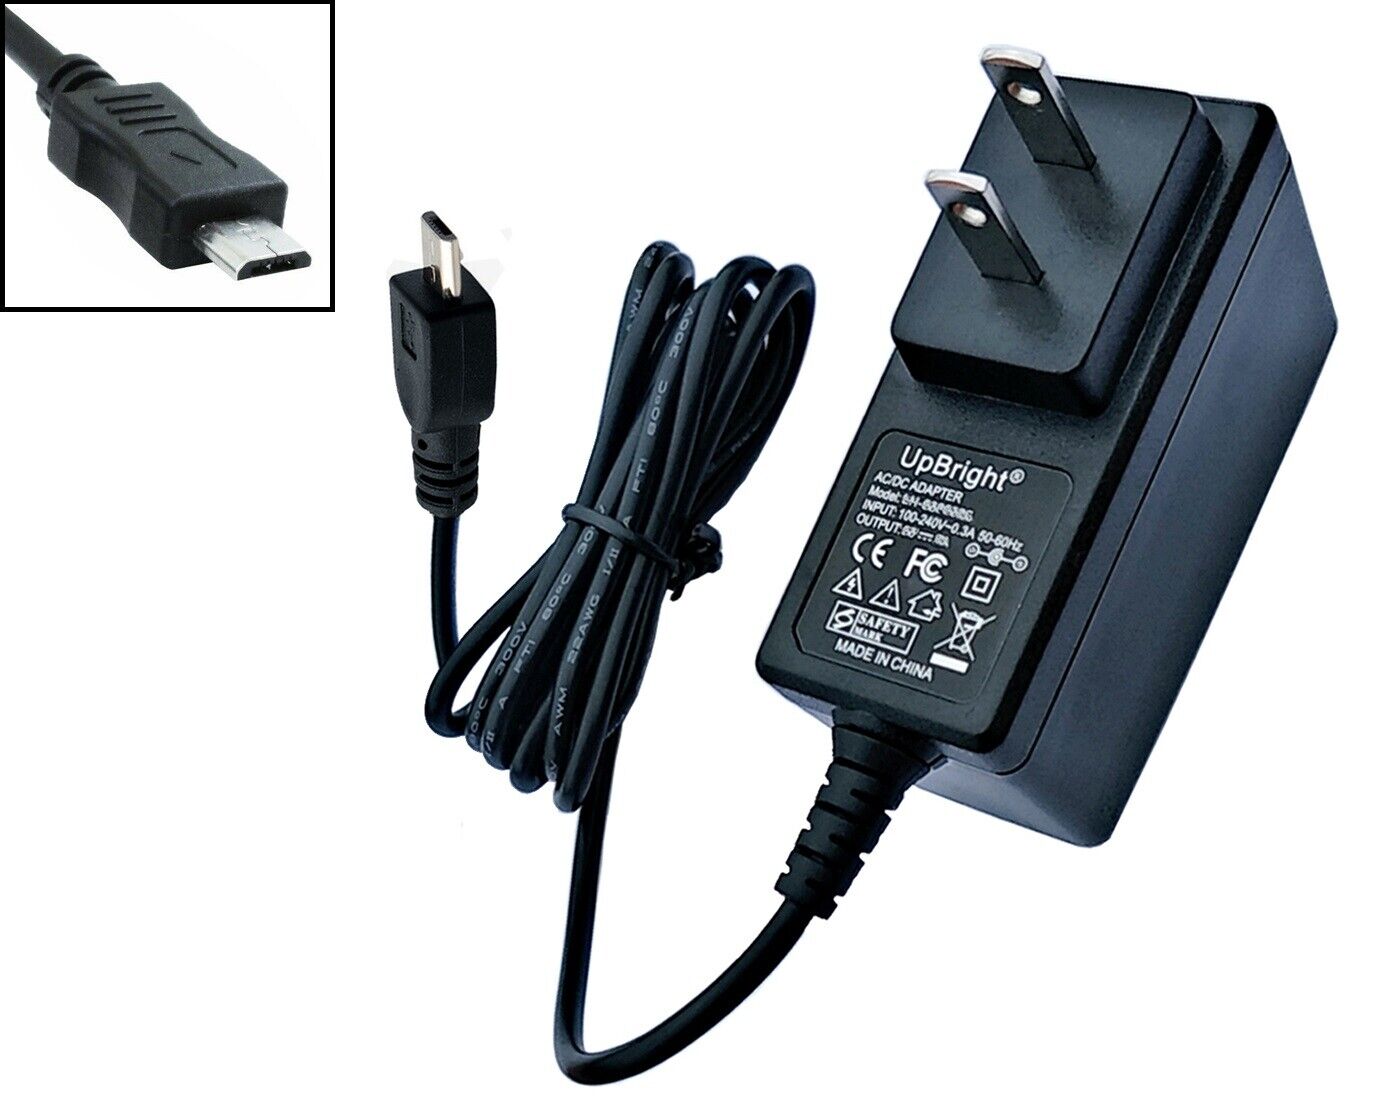 AC Adapter For QiSa YD-820W KR-T01 38800mAh Solar Waterproof Power Bank Charger 